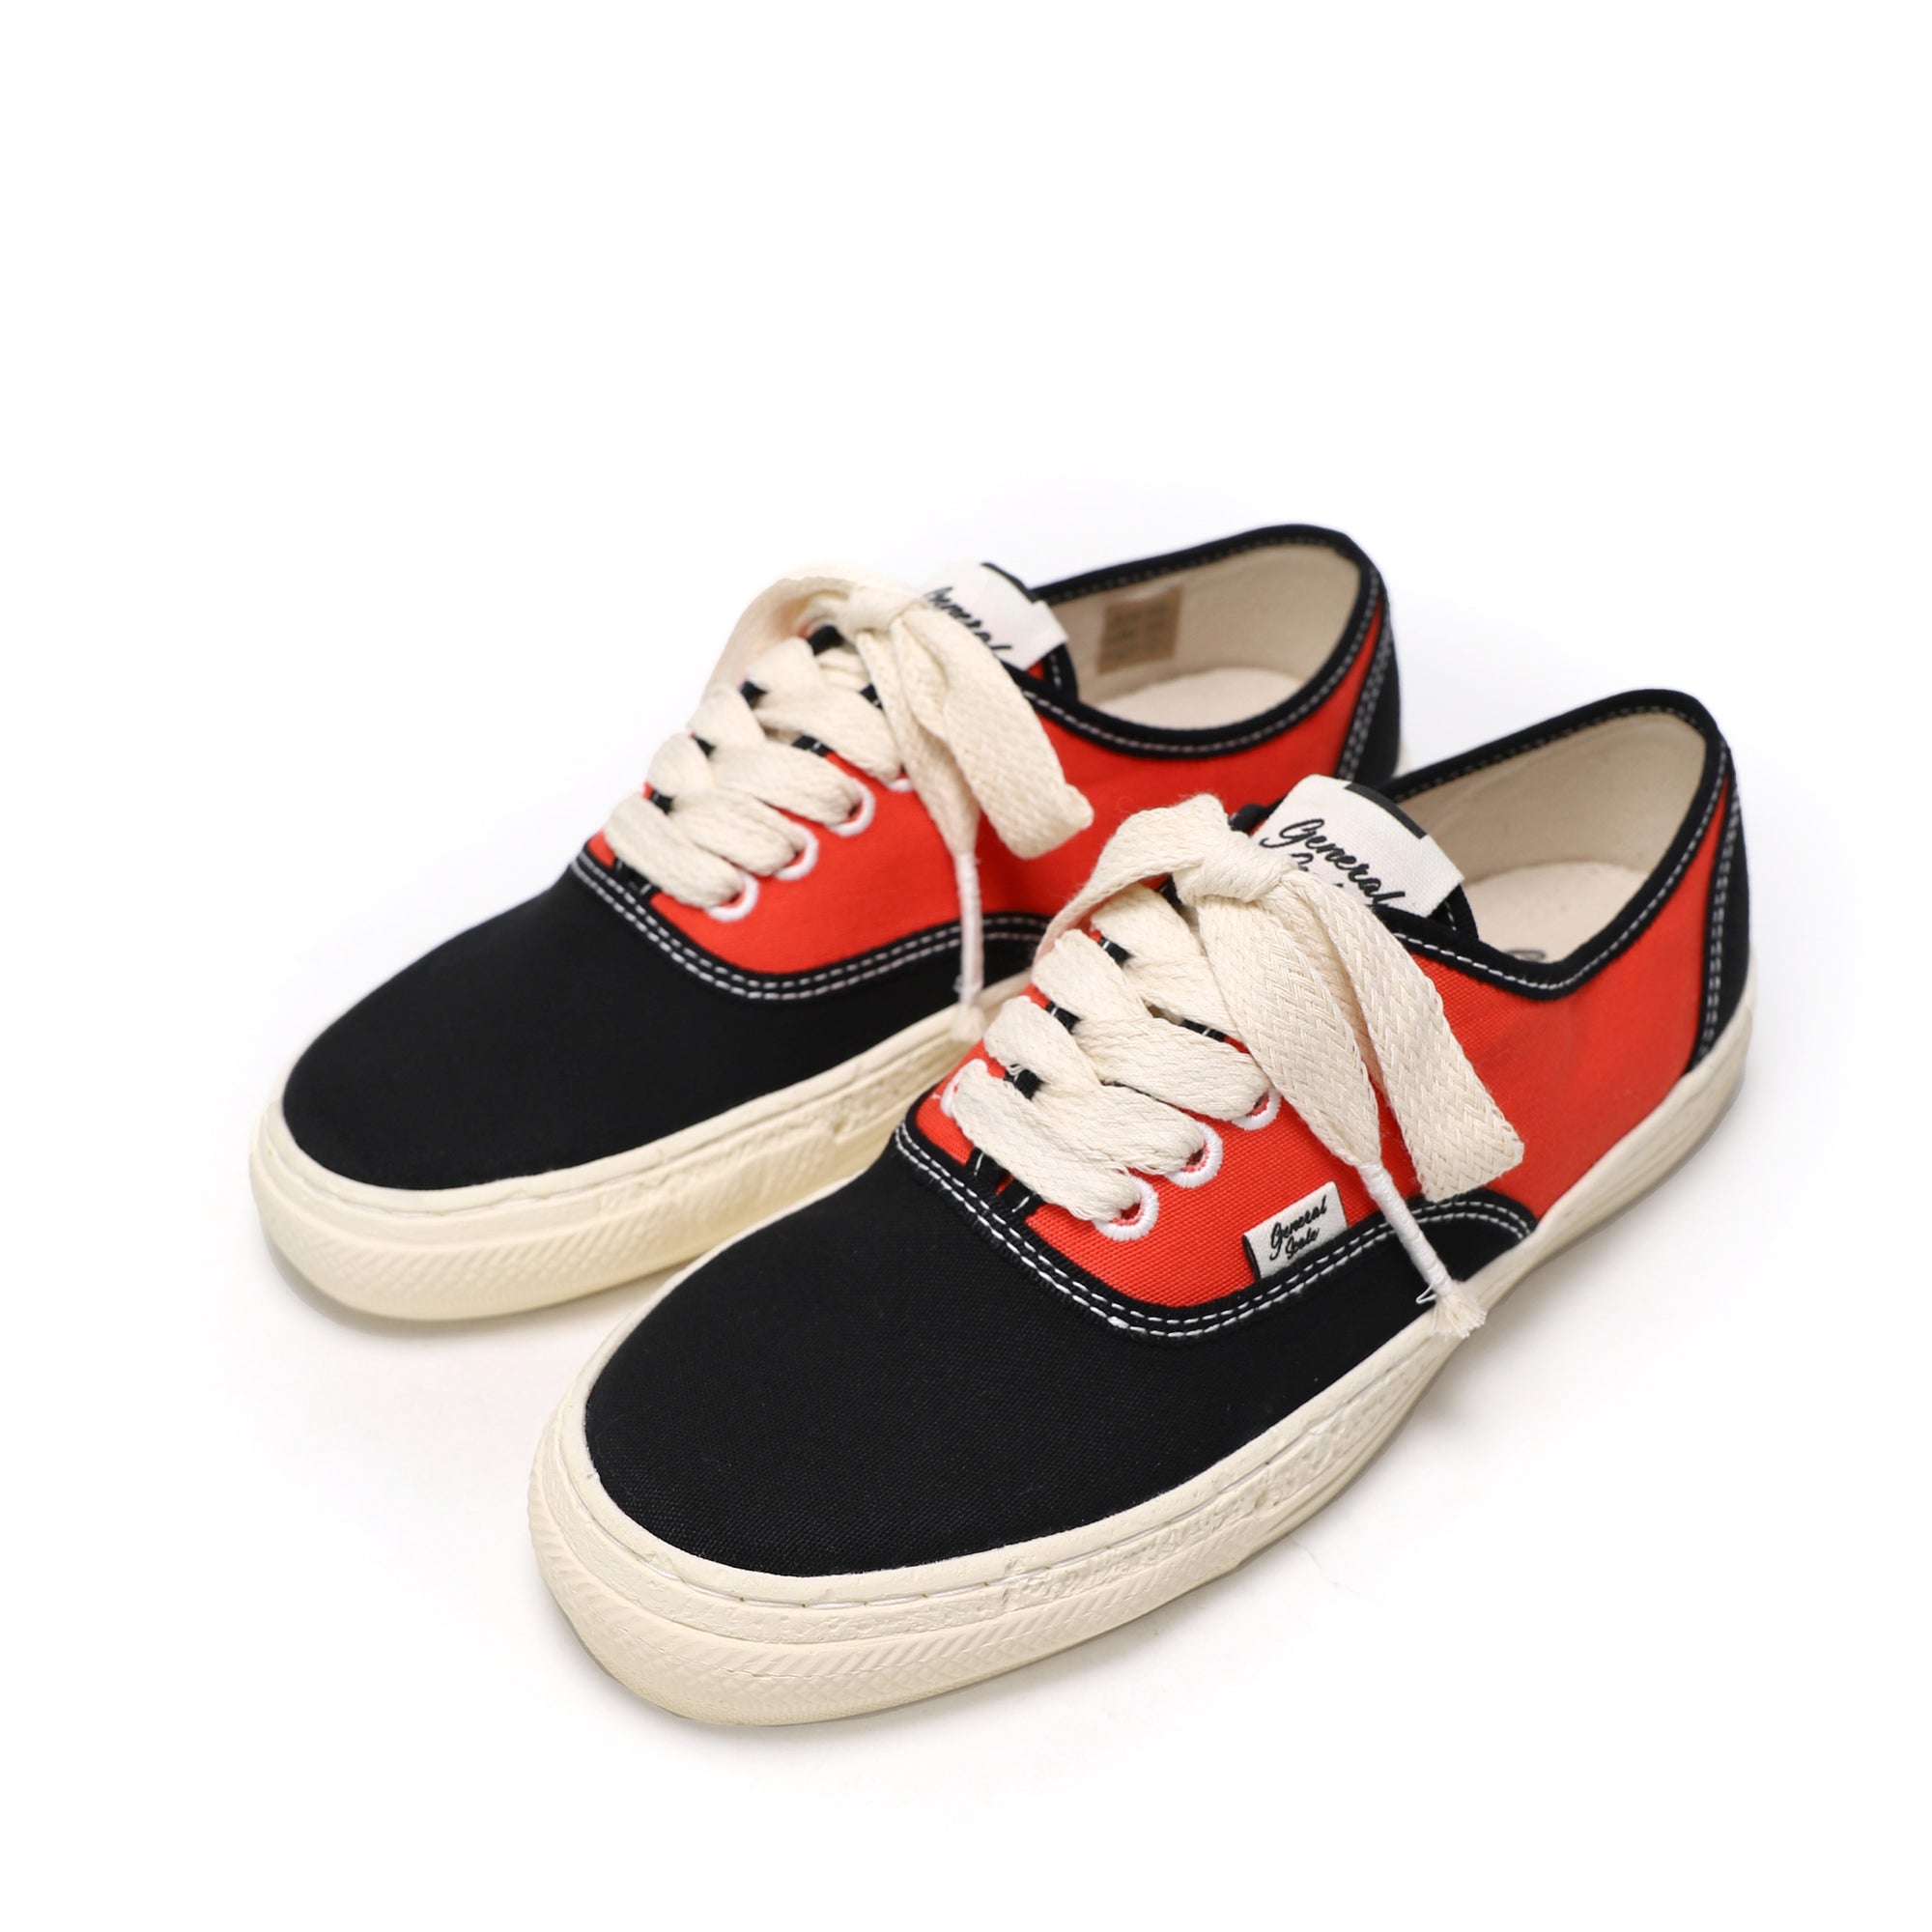 MAISON MIHARA YASUHIRO - SNEAKER GENERAL SCALE - A06FW503(RED) view 2